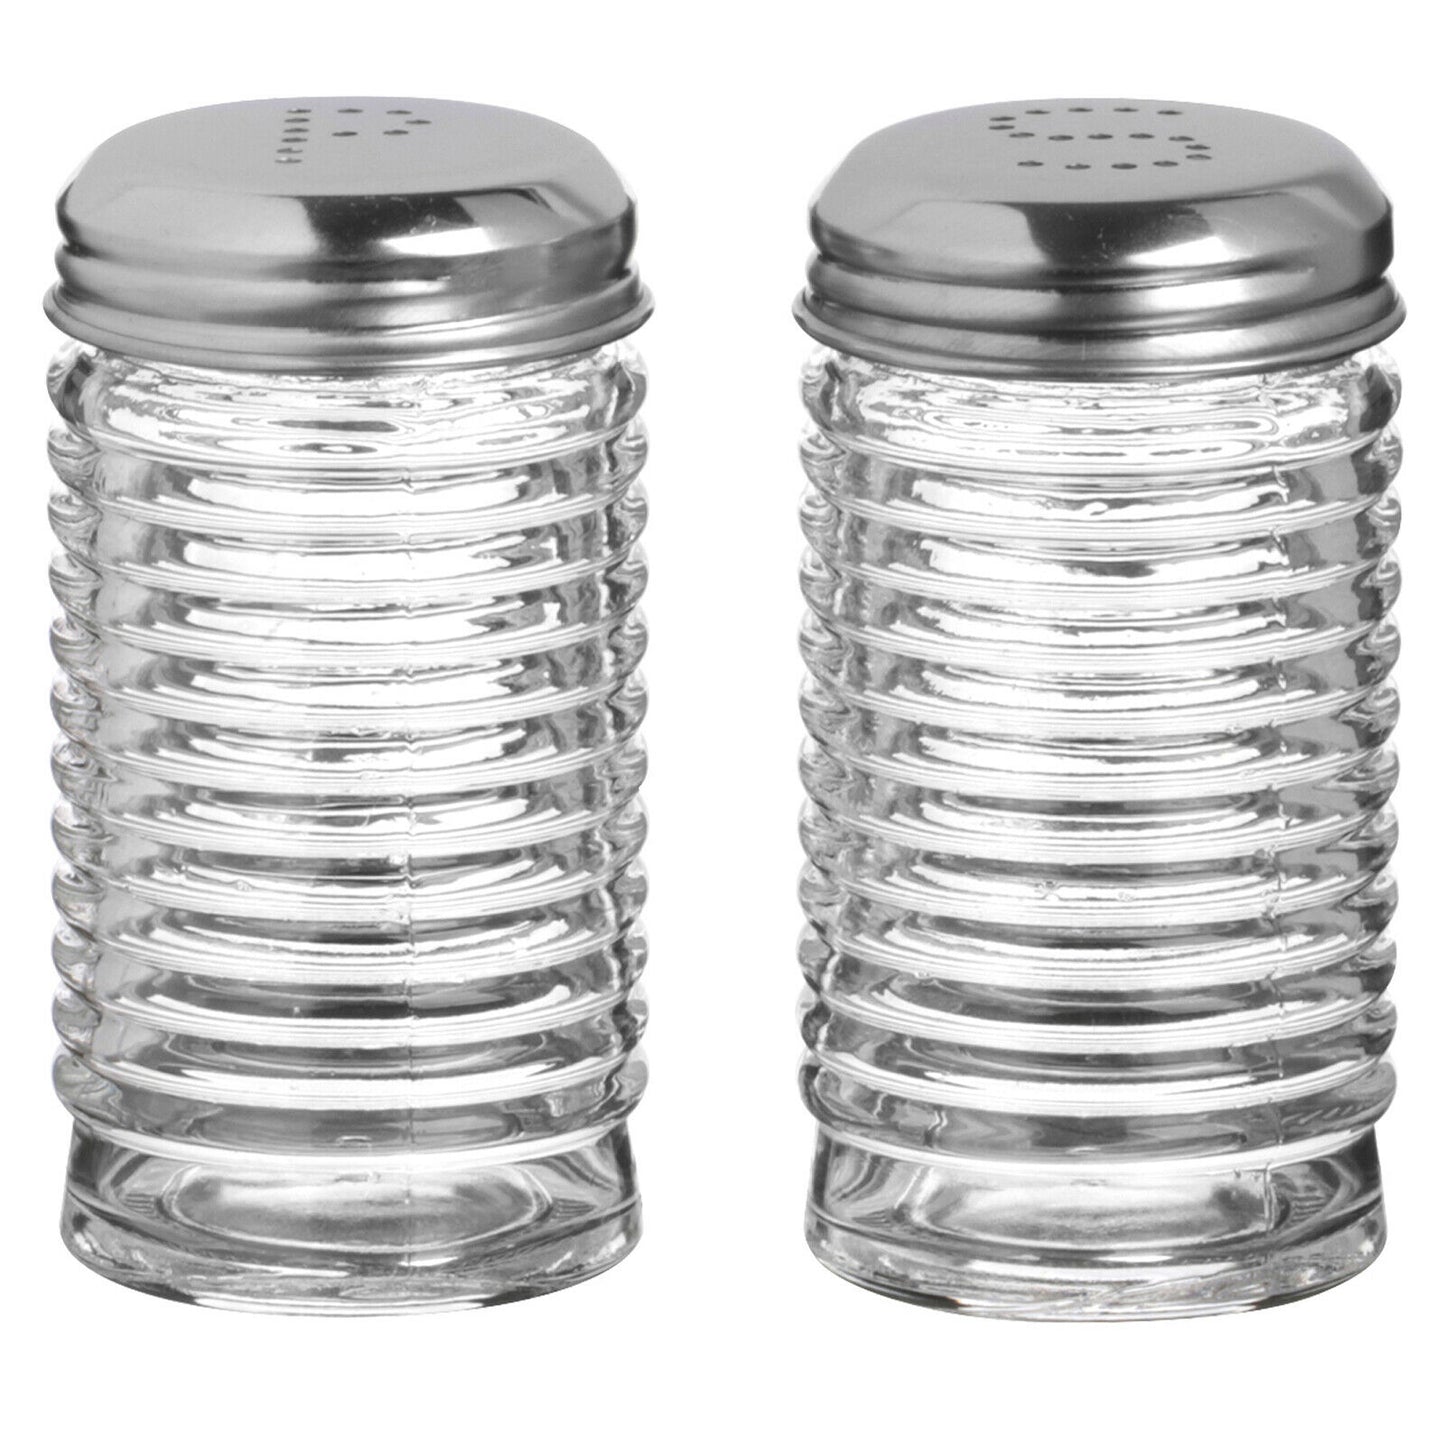 Novelty Ribbed Glass Salt and Pepper Pots Shakers Dispensers Condiment Set Cafe